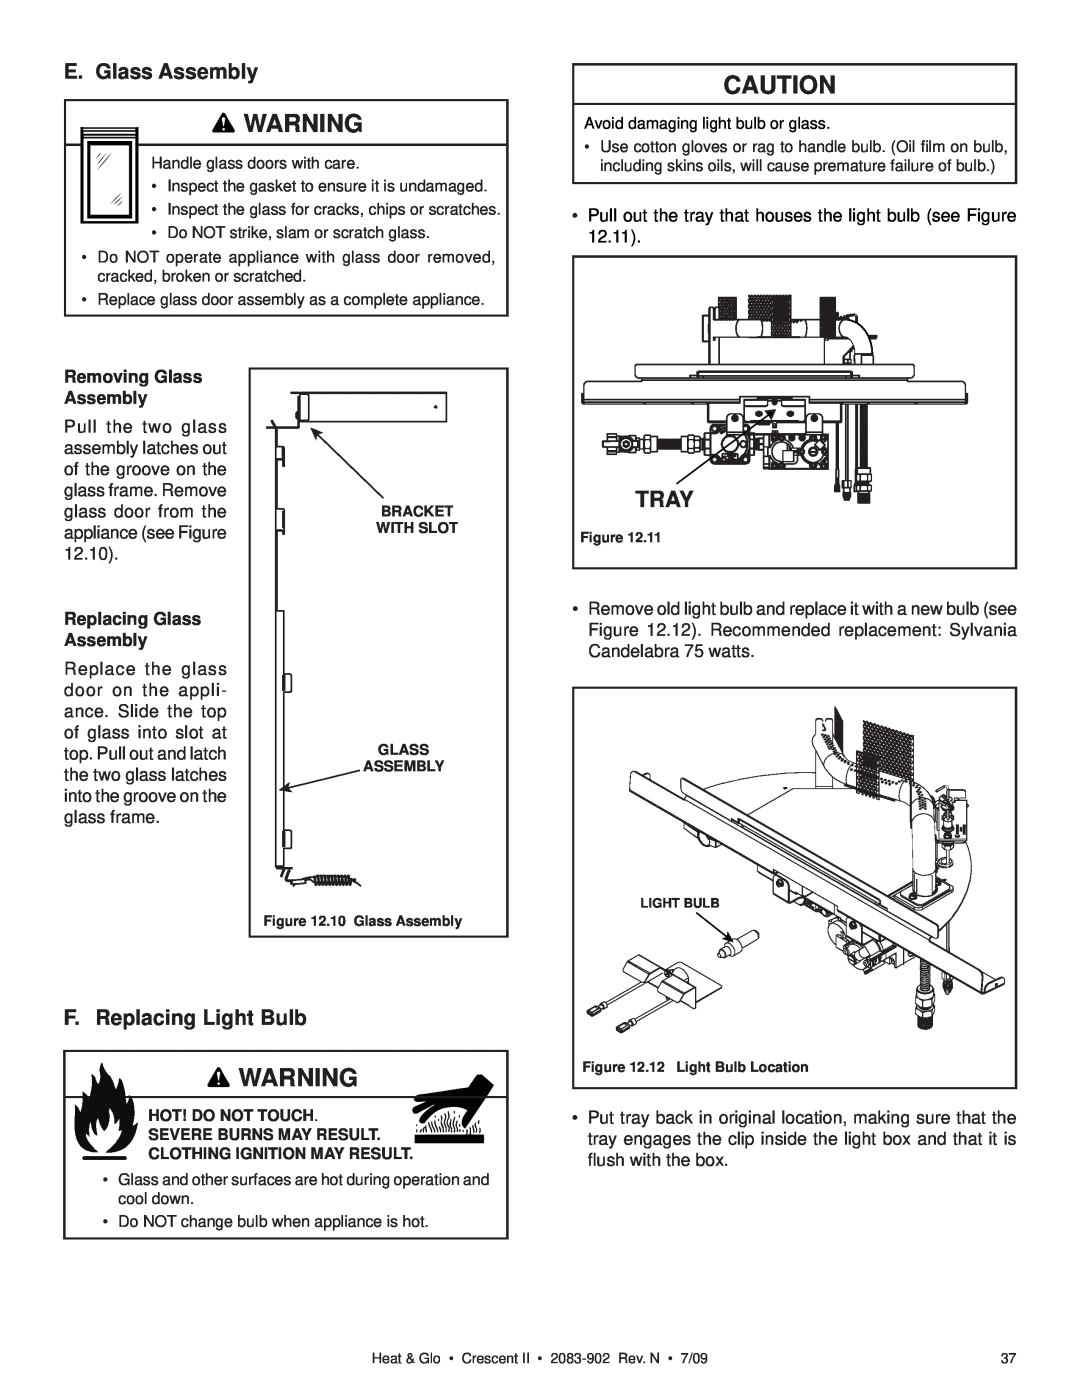 Heat & Glo LifeStyle CRESCENT II owner manual Tray, E. Glass Assembly, F. Replacing Light Bulb 